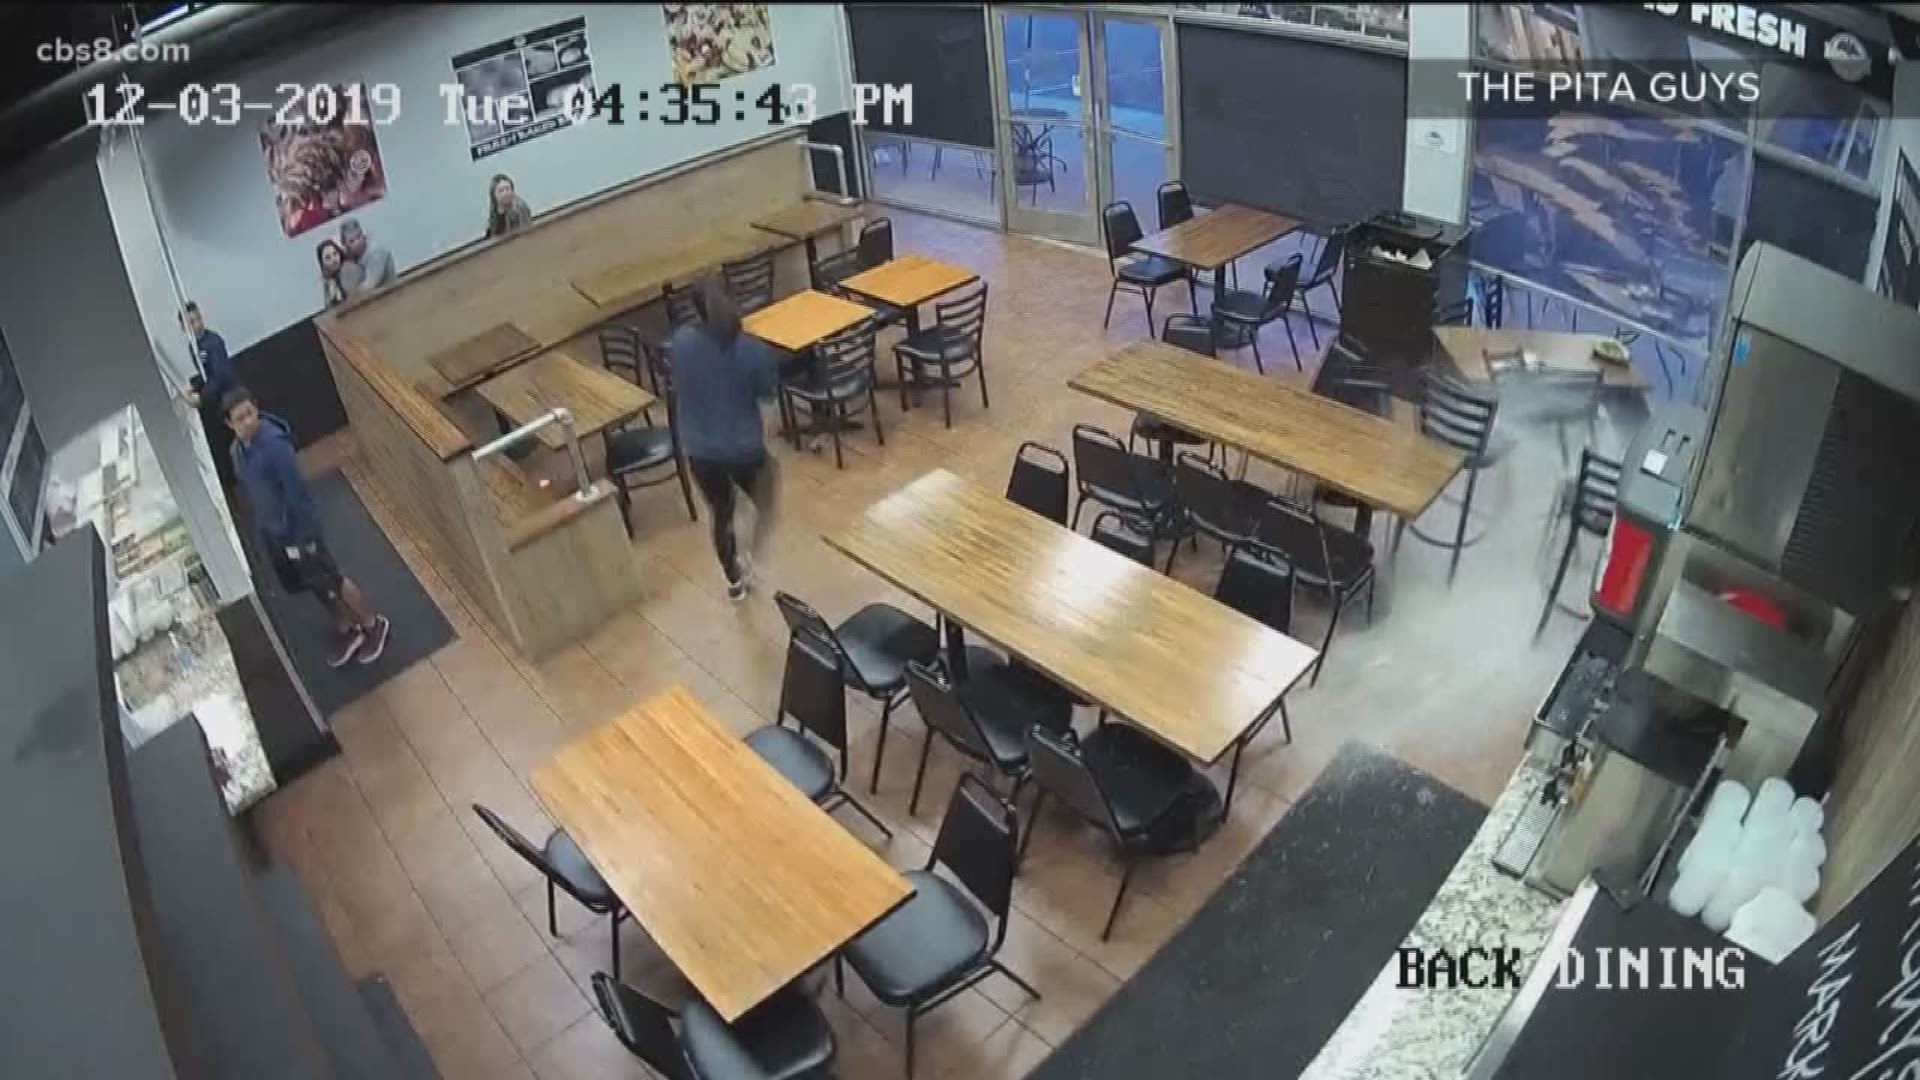 In the video you can see a woman puts a plate of food down, then walks away. Seconds later, a car comes crashing into the restaurant exactly where she was standing.